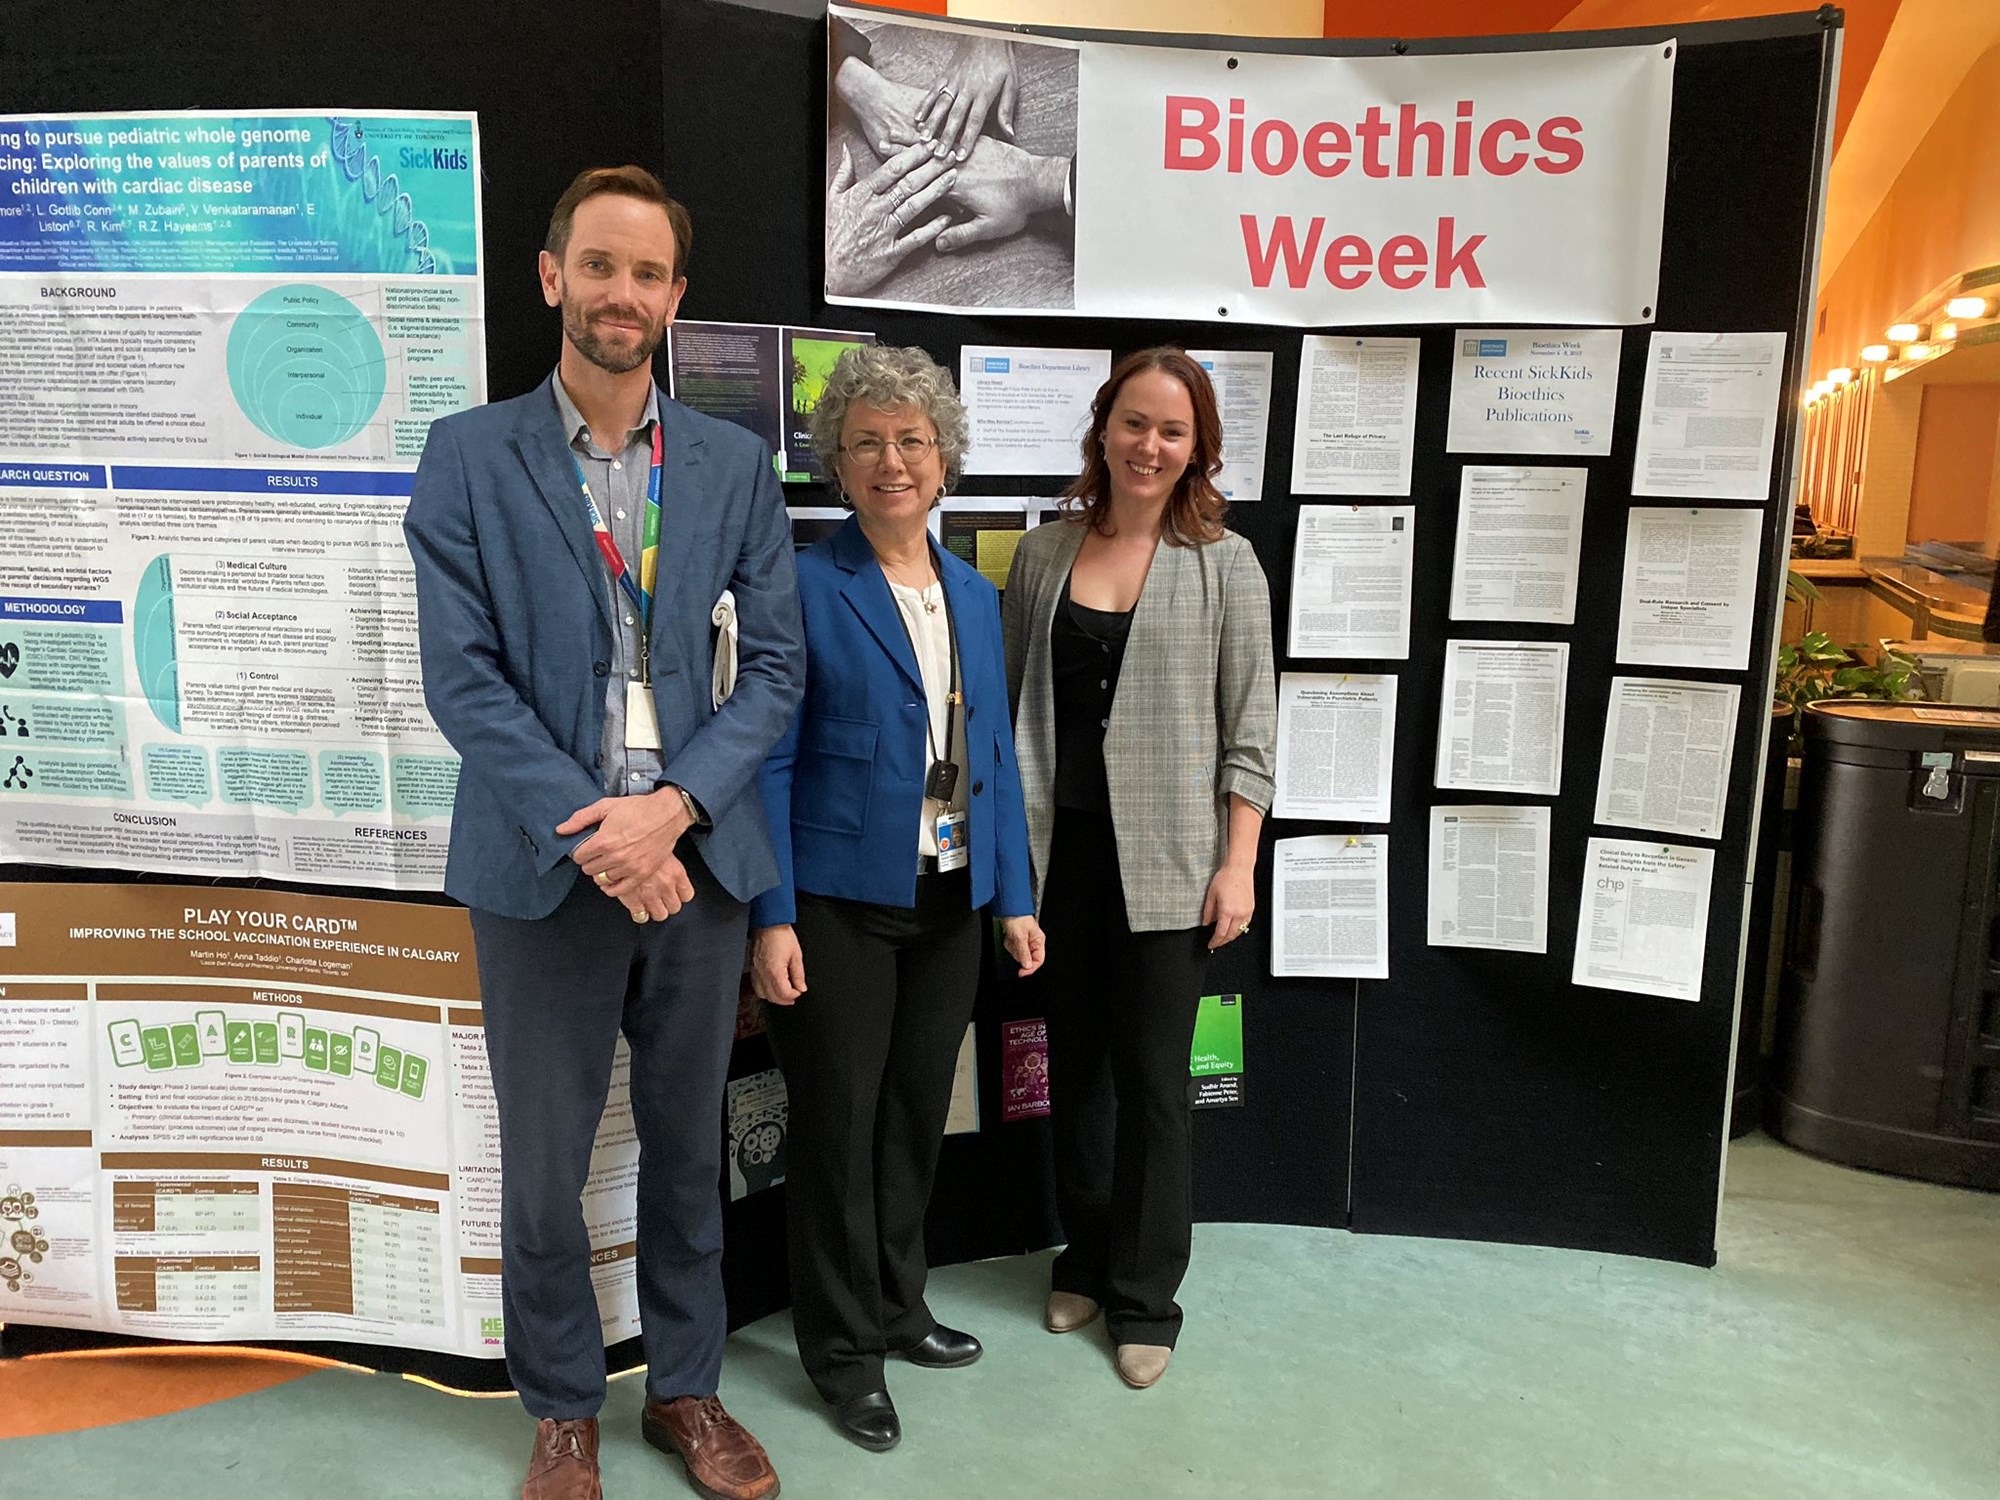 Three staff stand together in front of a poster display with a banner that reads Bioethics Week in the background.